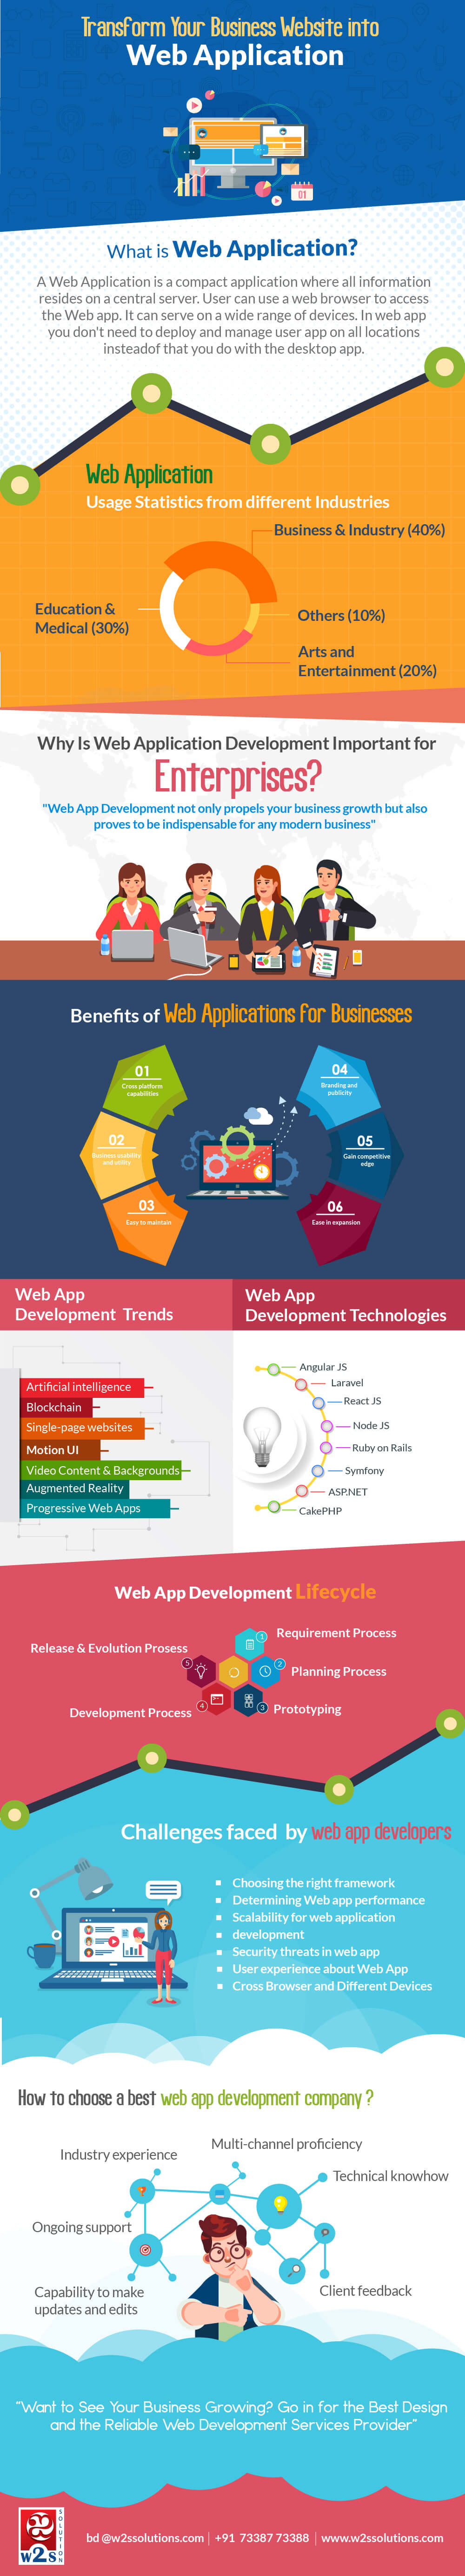 Transform your business Website into Web Application